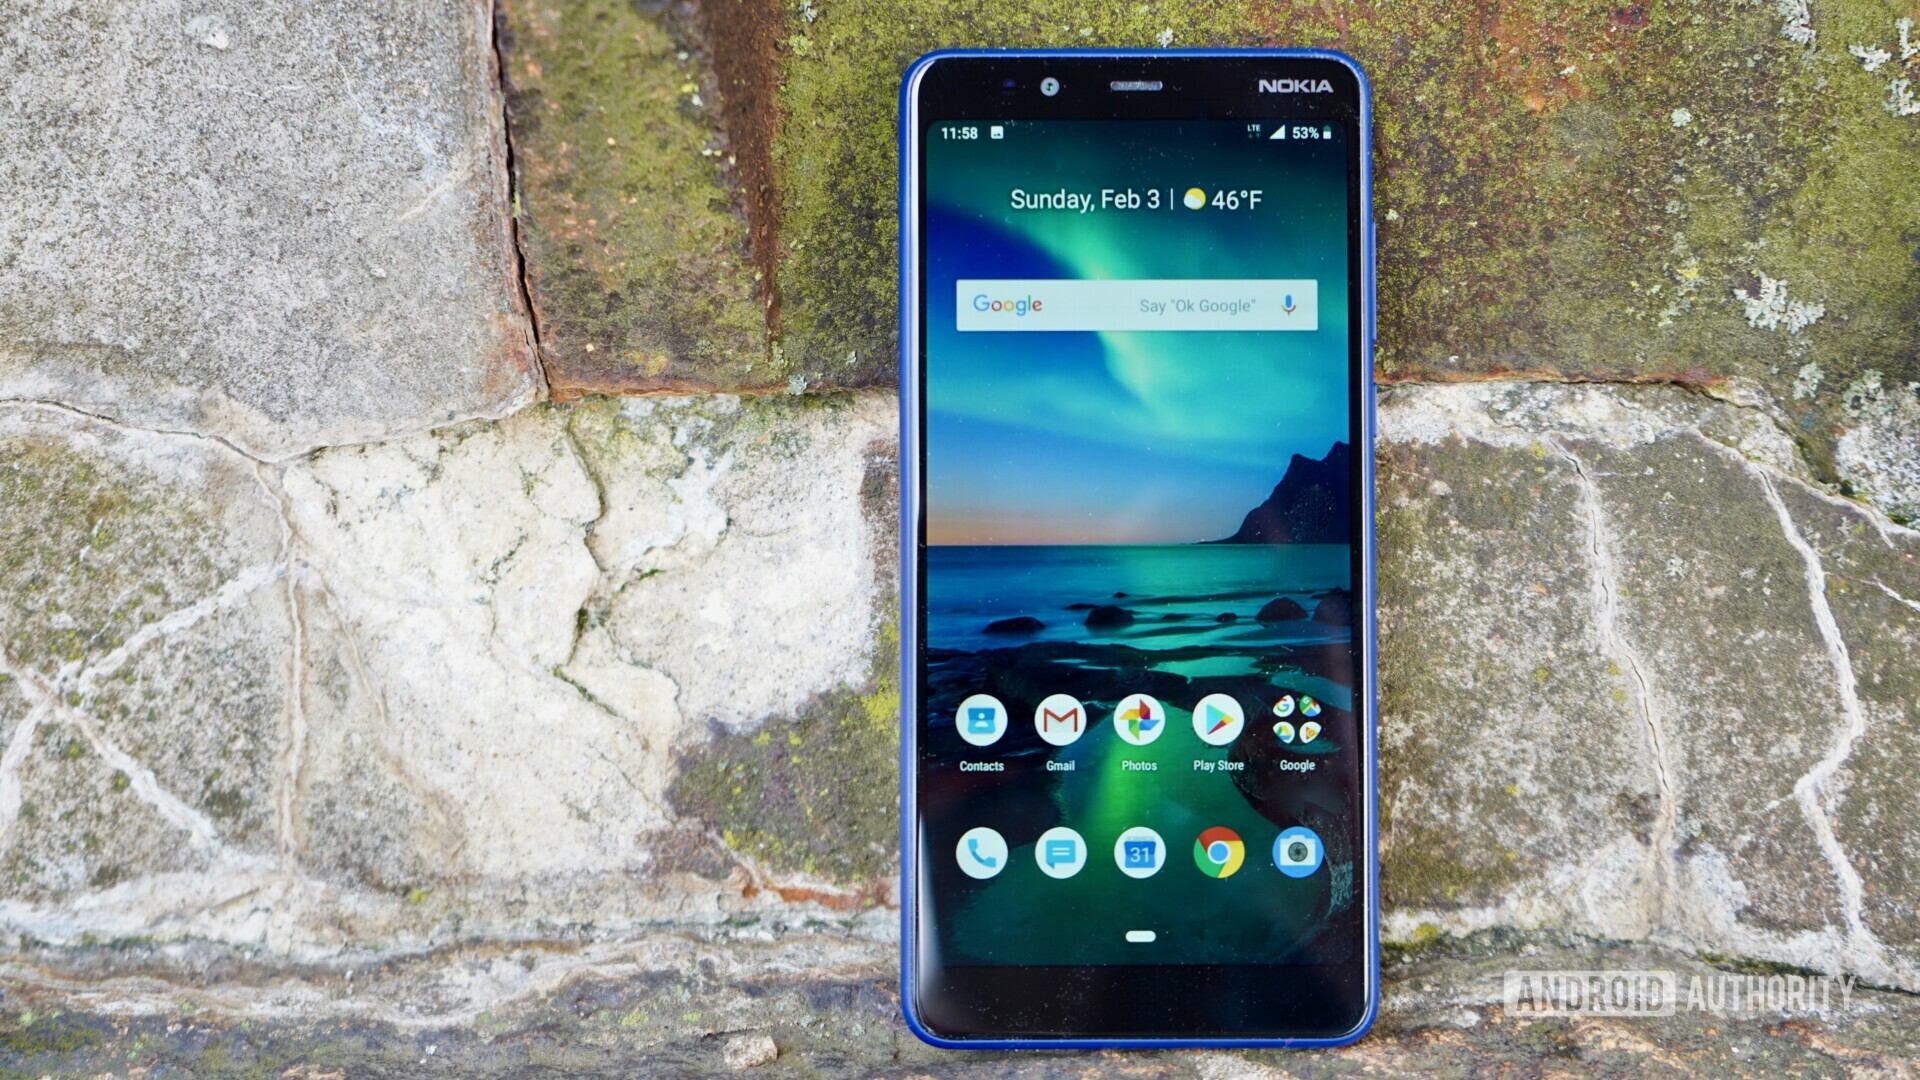 The front side of a Blue Nokia 3.1 Plus layed on a gray stone.